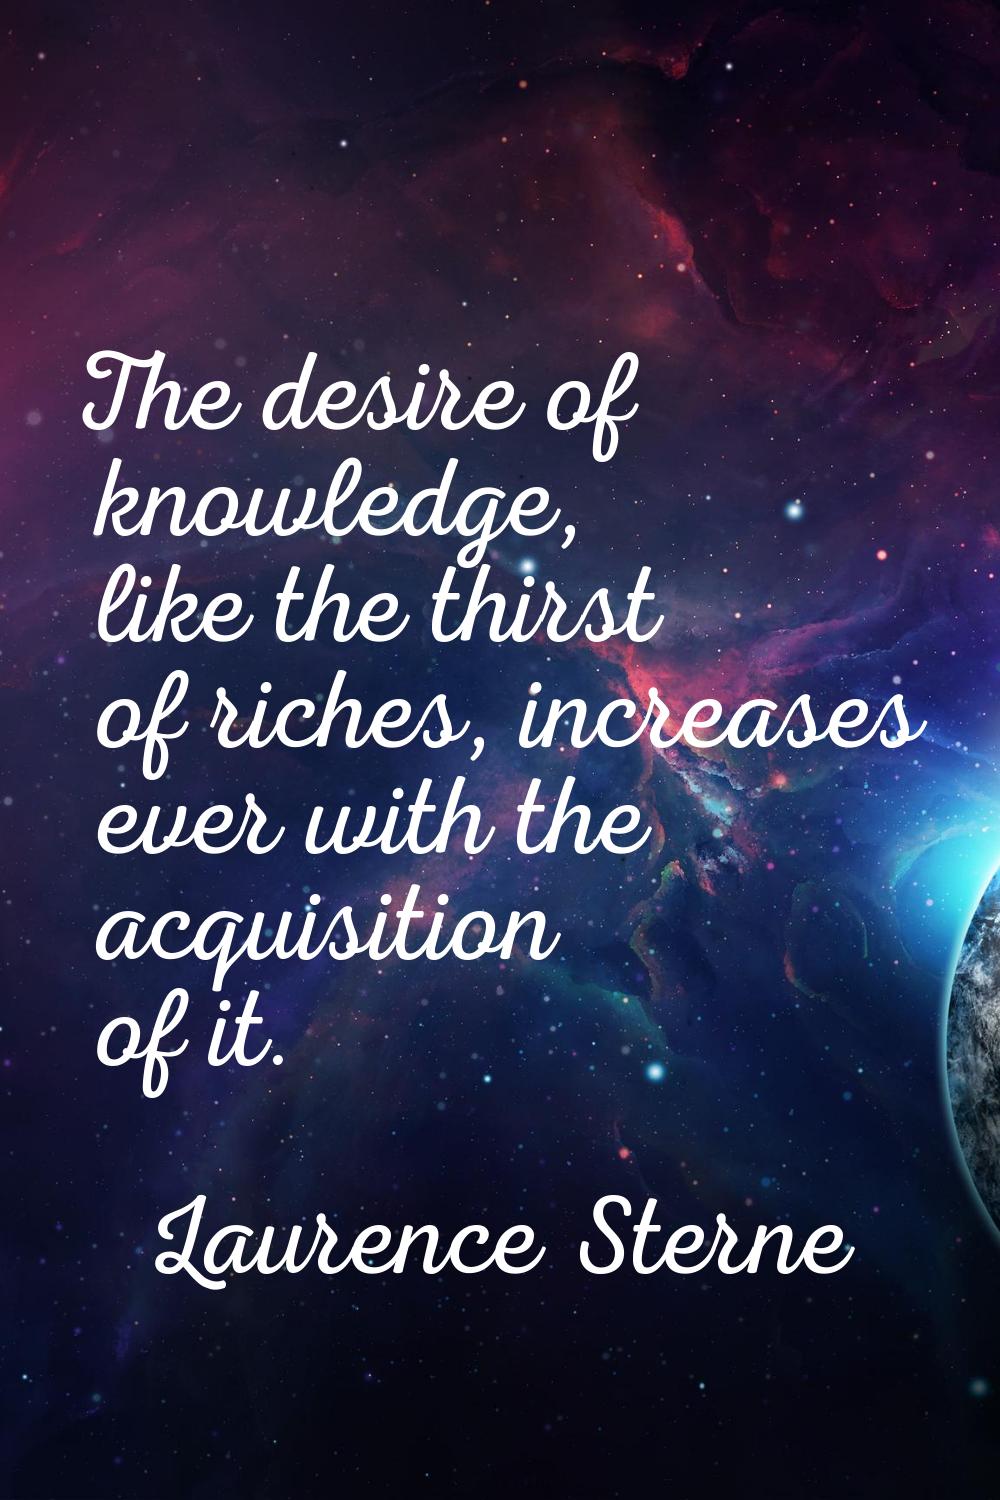 The desire of knowledge, like the thirst of riches, increases ever with the acquisition of it.